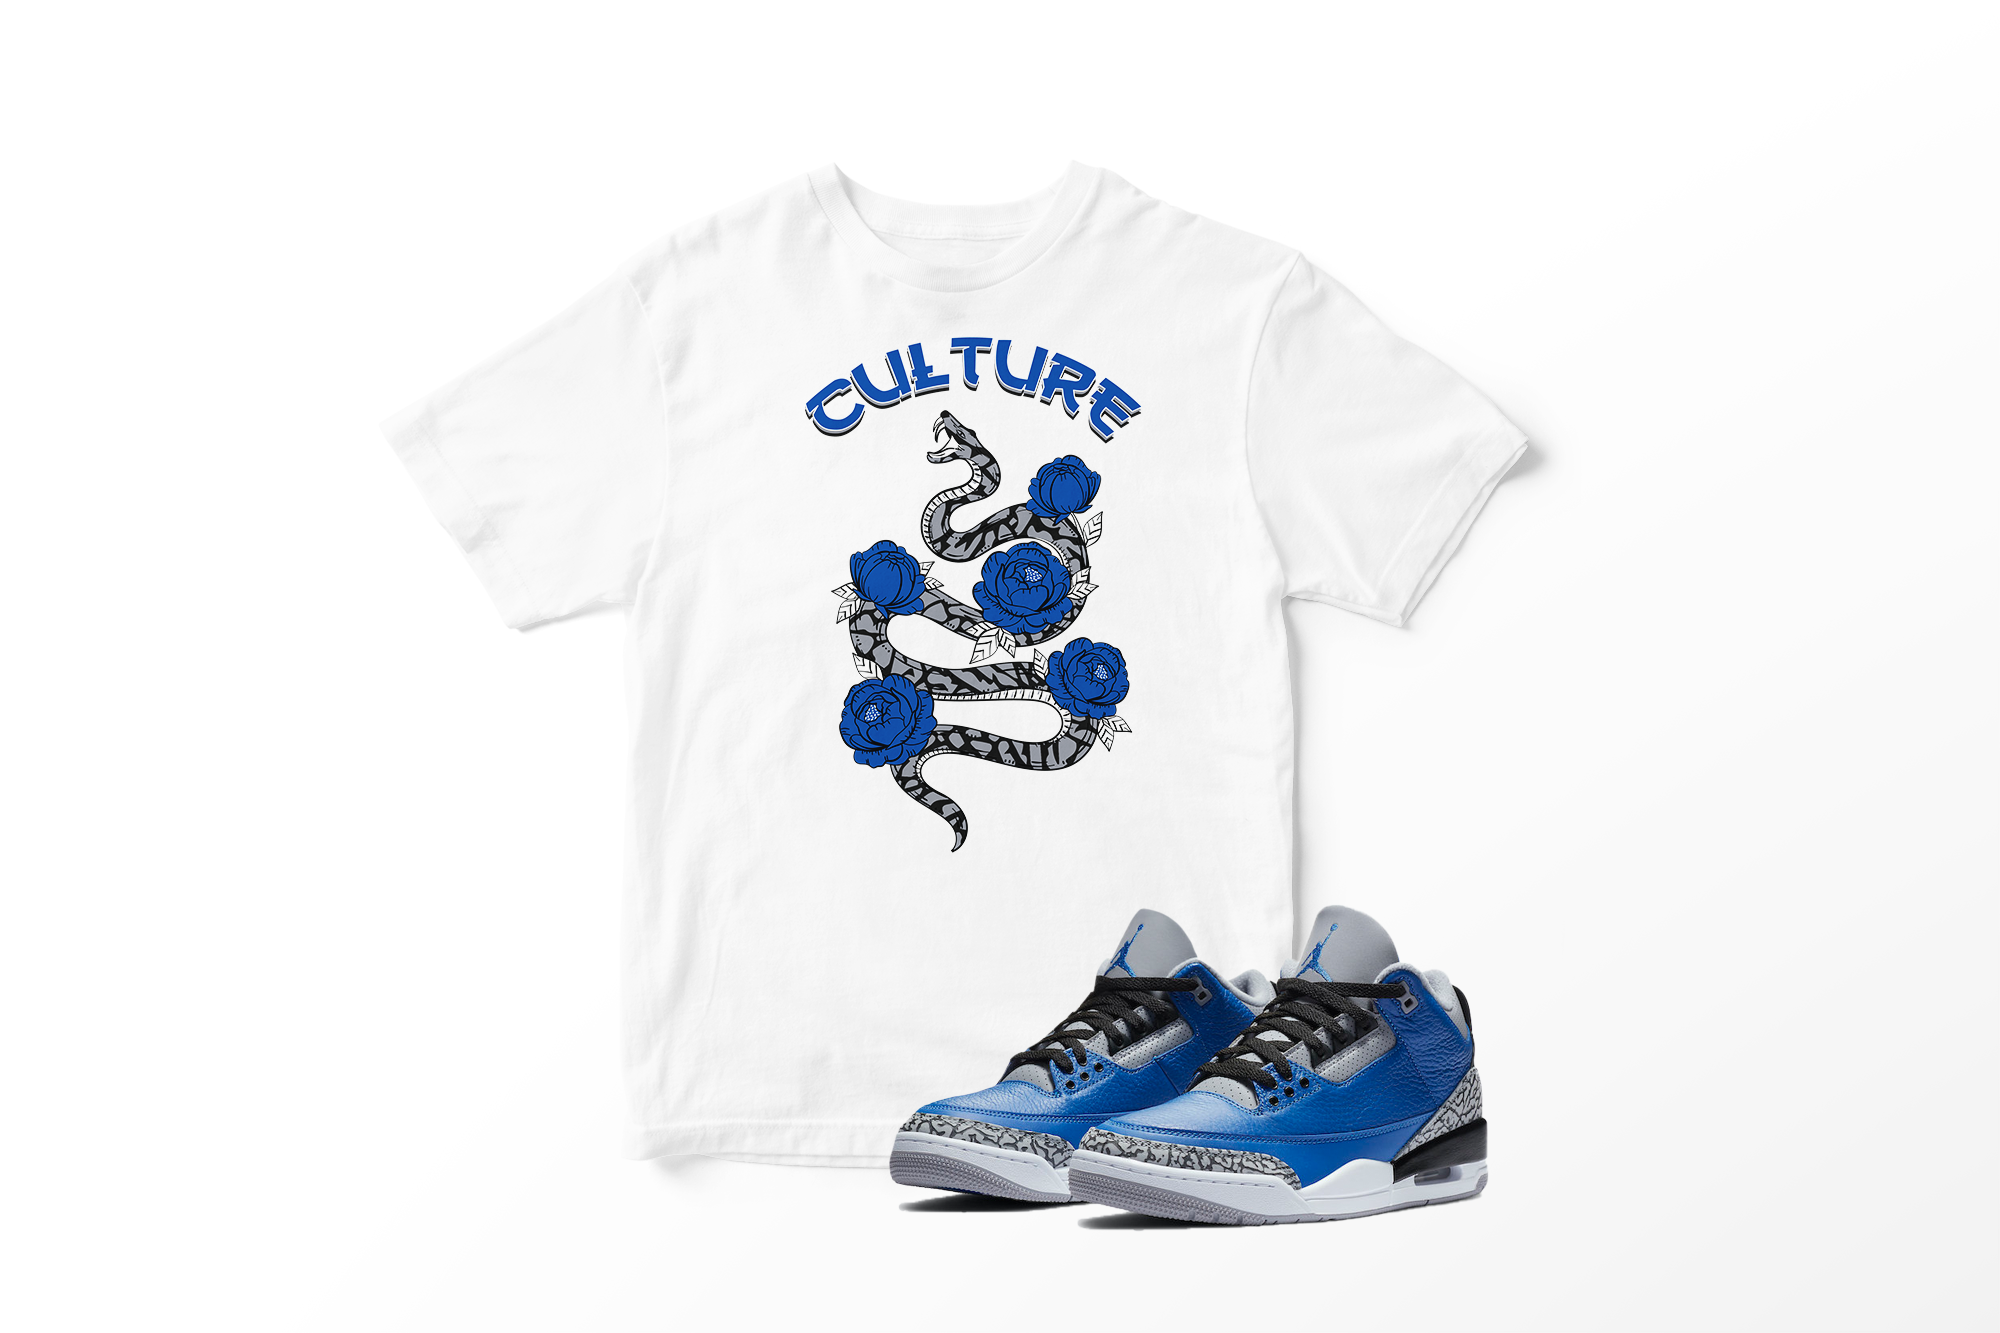 'Culture Snake' in Royal CW Short Sleeve Tee